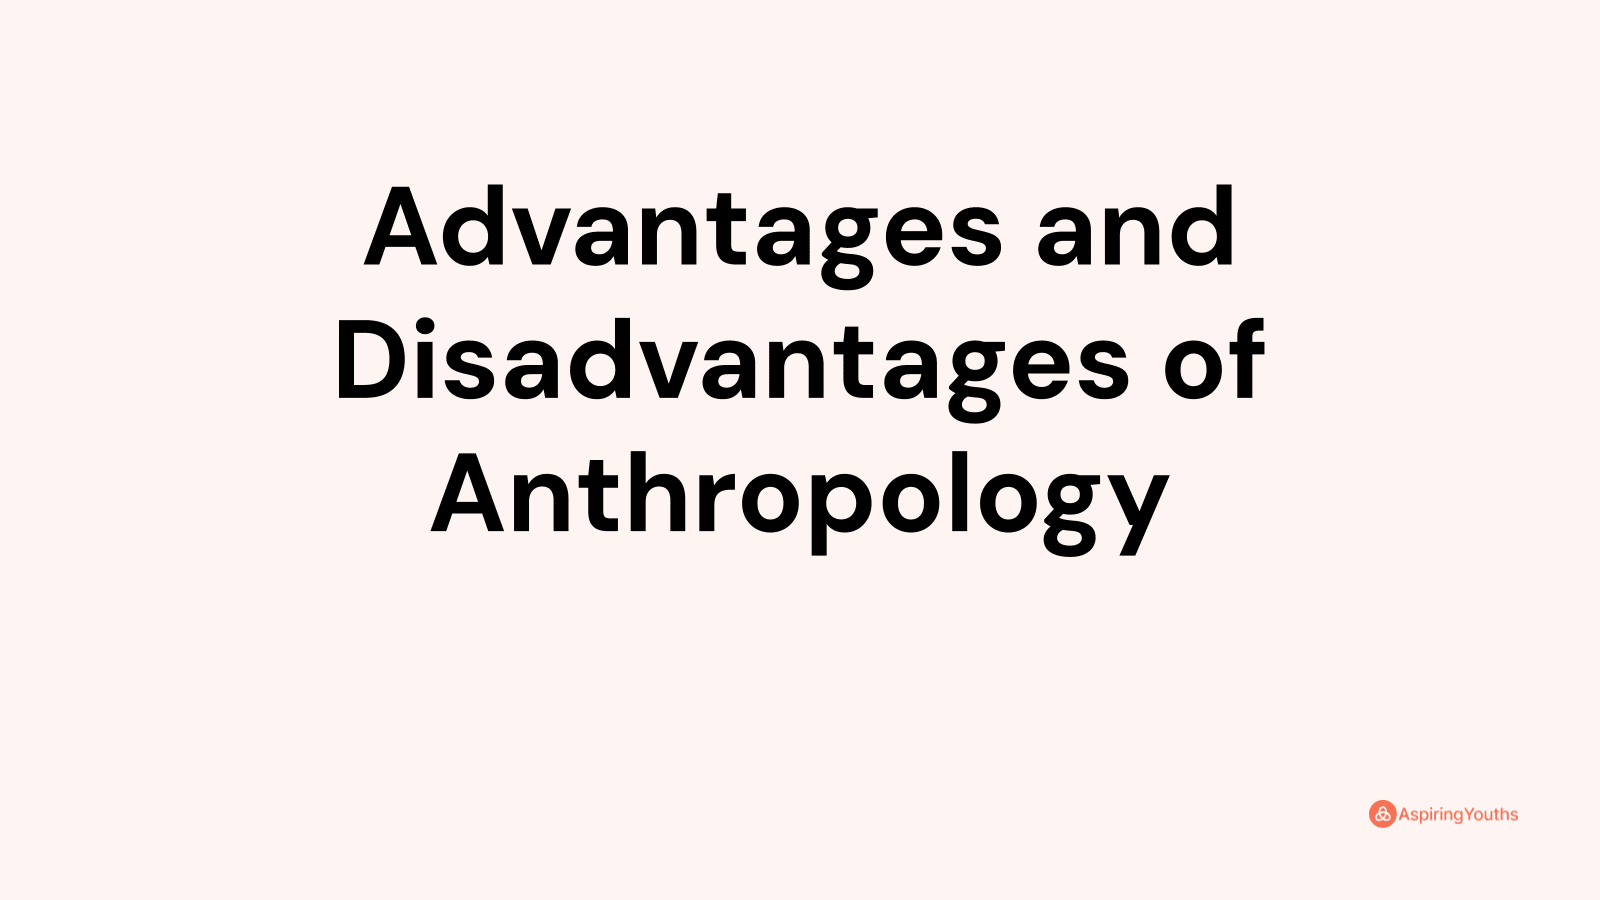 Advantages and disadvantages of Anthropology